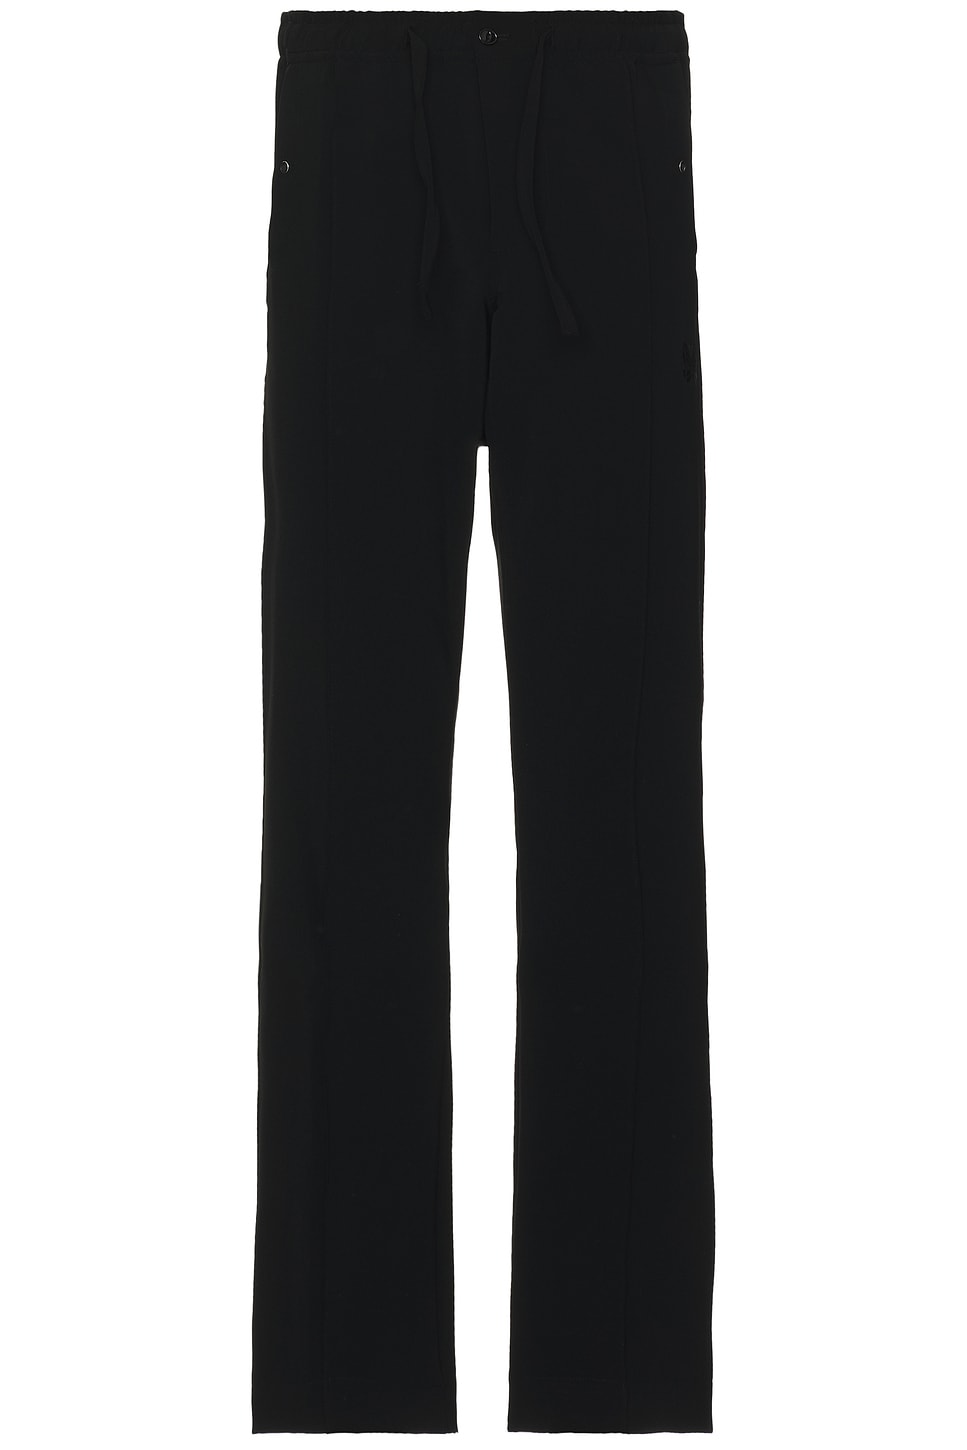 Image 1 of Needles Piping Cowboy Pant Double Cloth In Black in Black